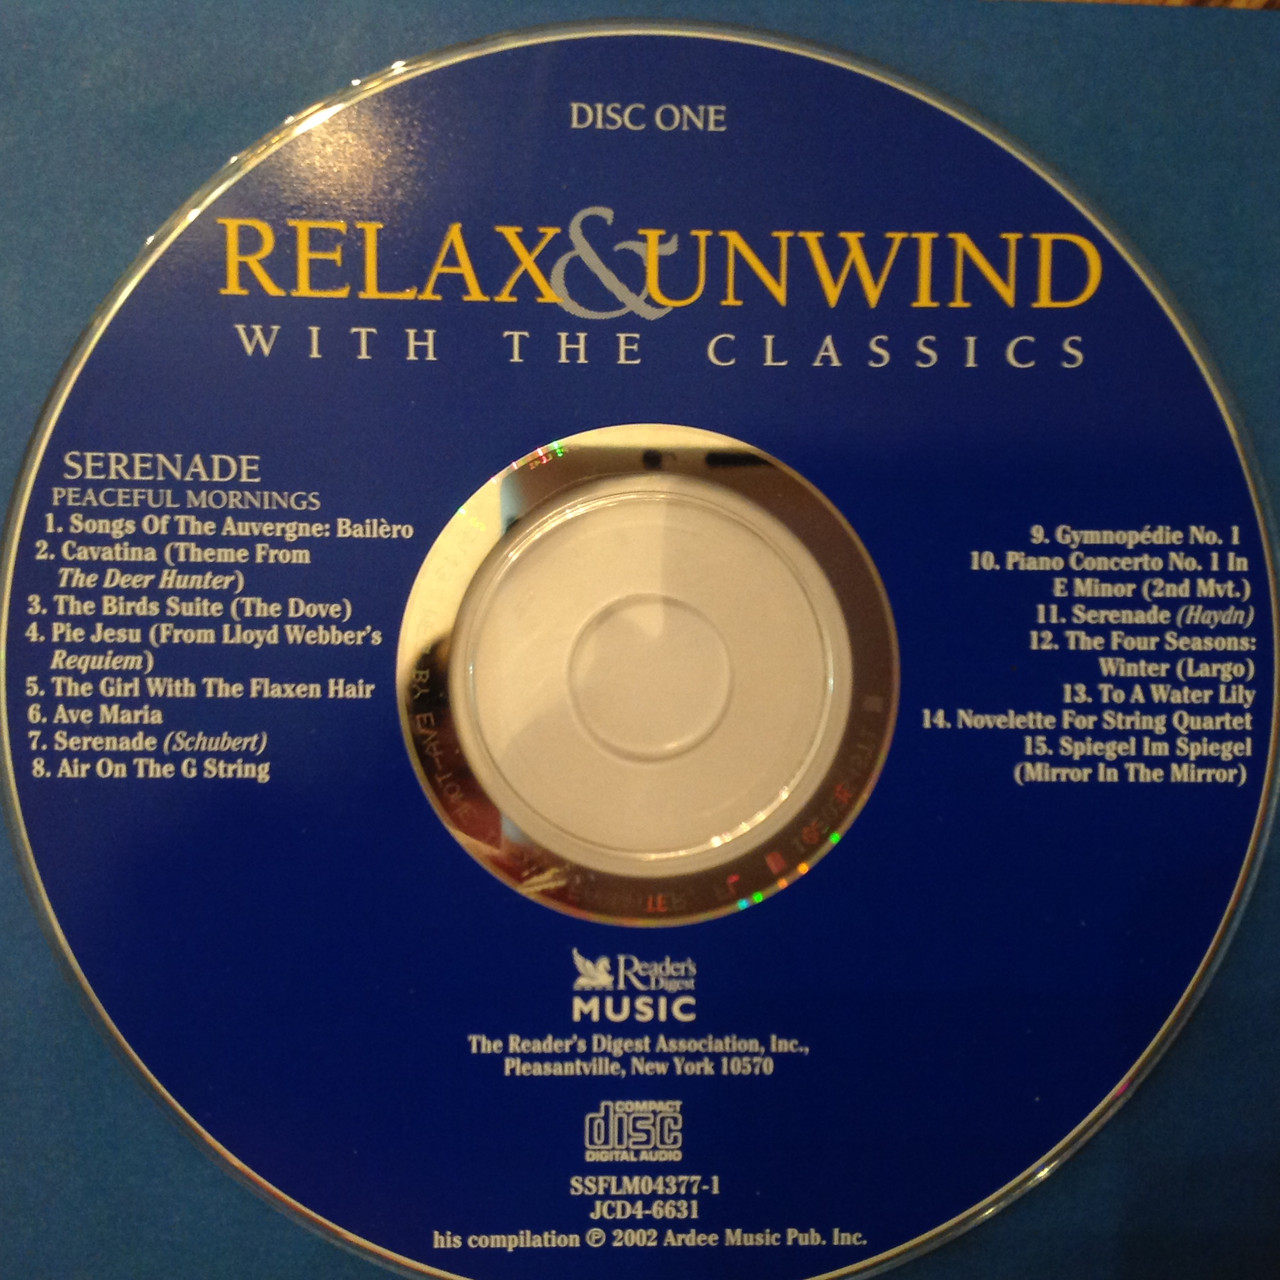 Holy　Gift　Unwind　of　Angels　Penitents　CD　Confraternity　with　Classics　the　Relax　Shop